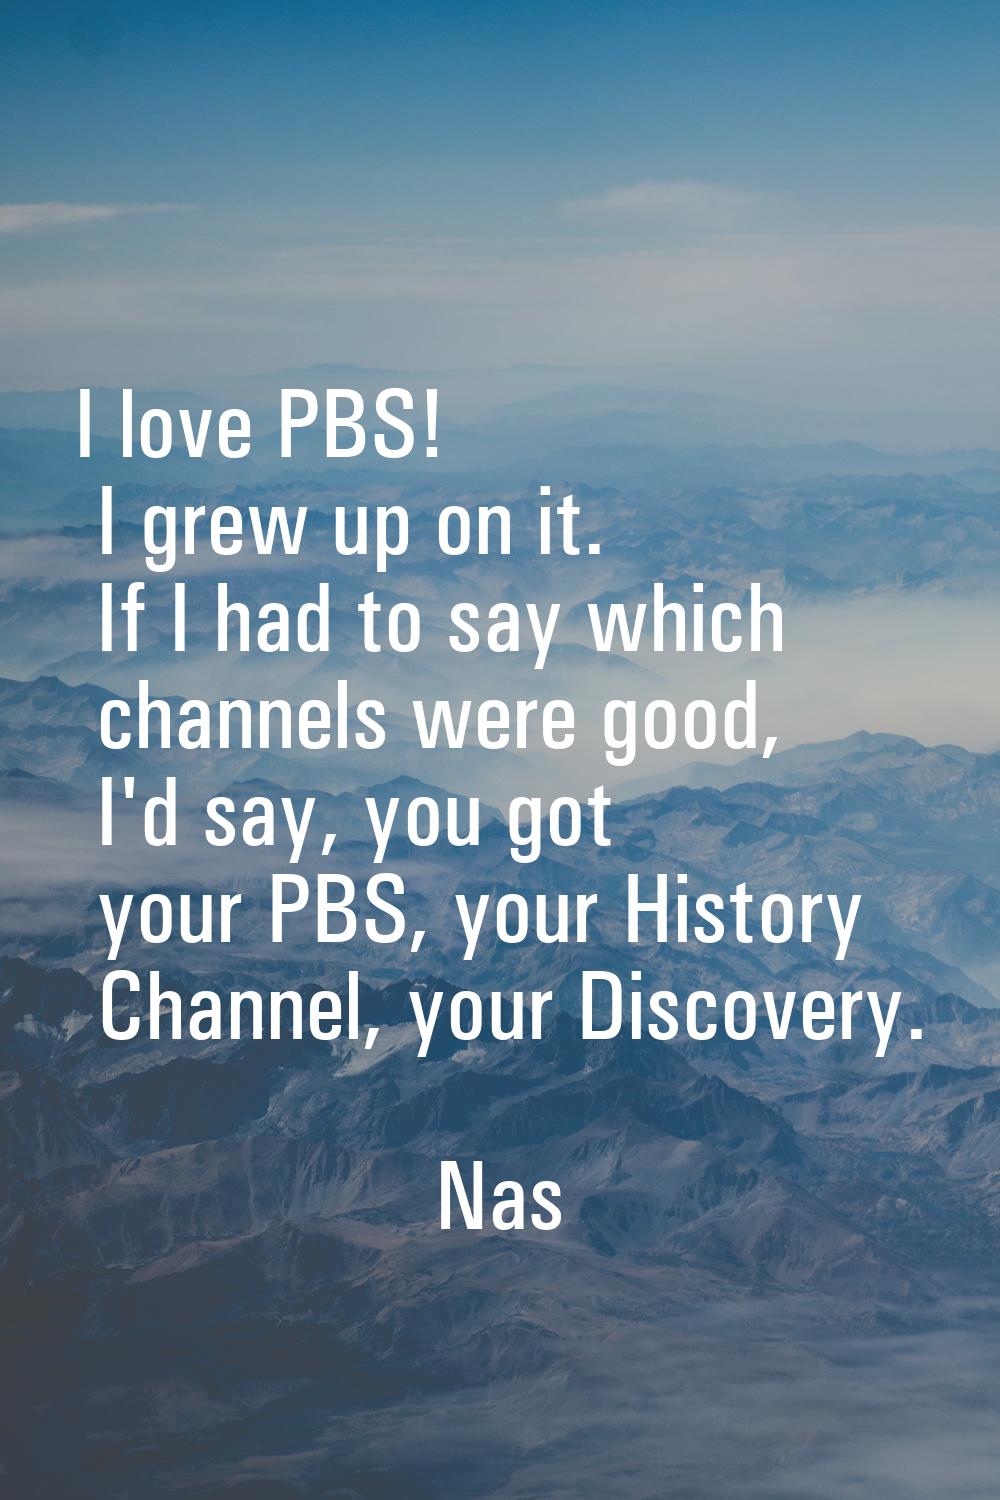 I love PBS! I grew up on it. If I had to say which channels were good, I'd say, you got your PBS, y